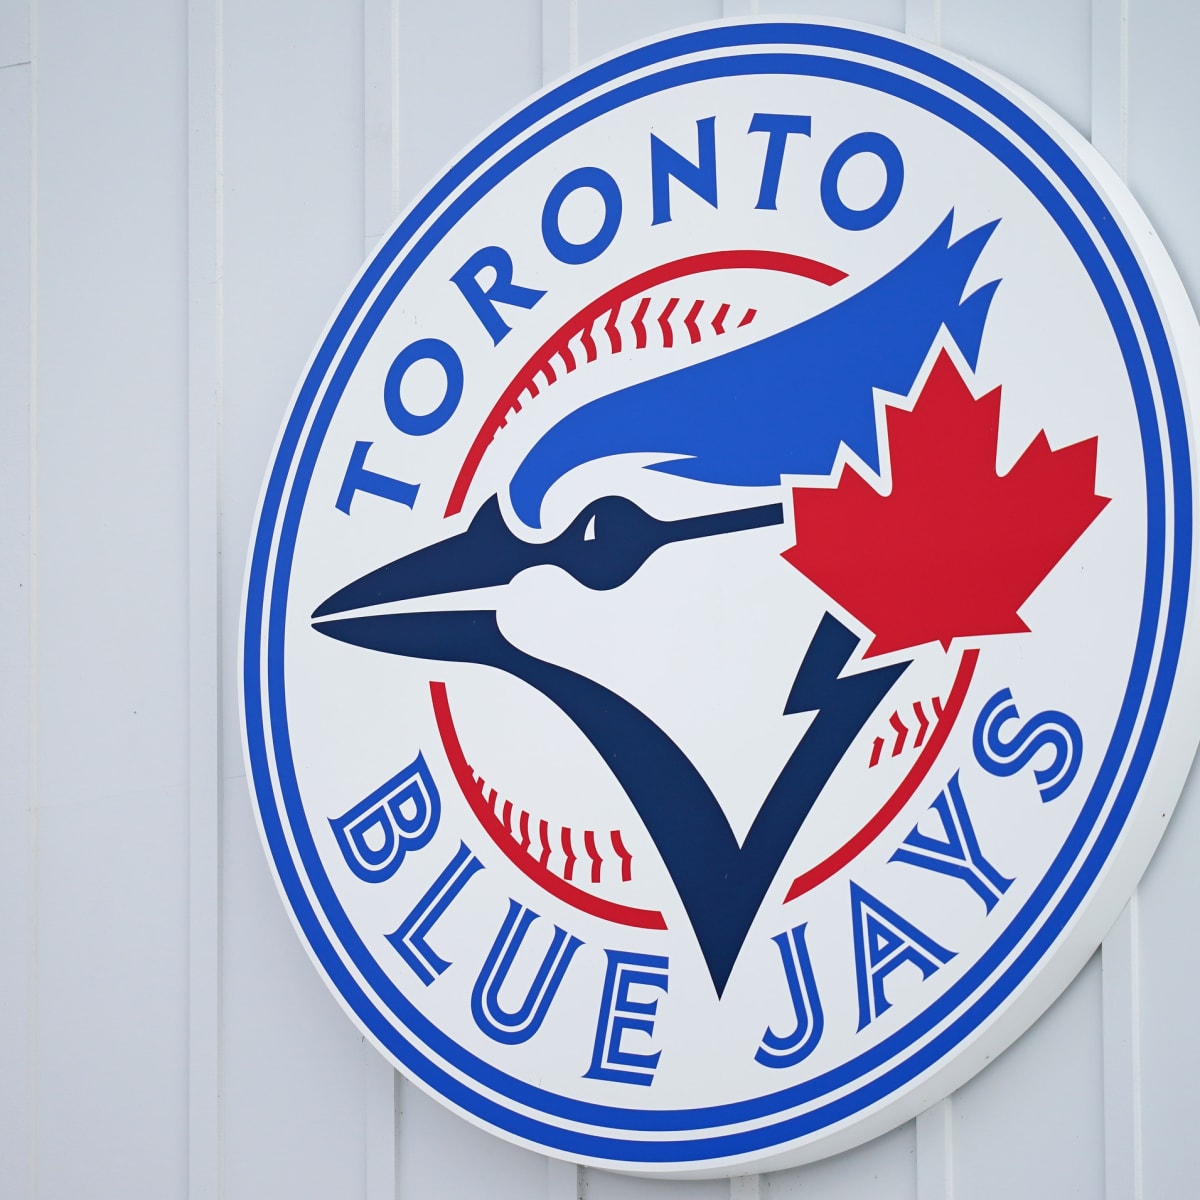 MLB The Show - The Toronto Blue Jays mean business! 🔥 Here is